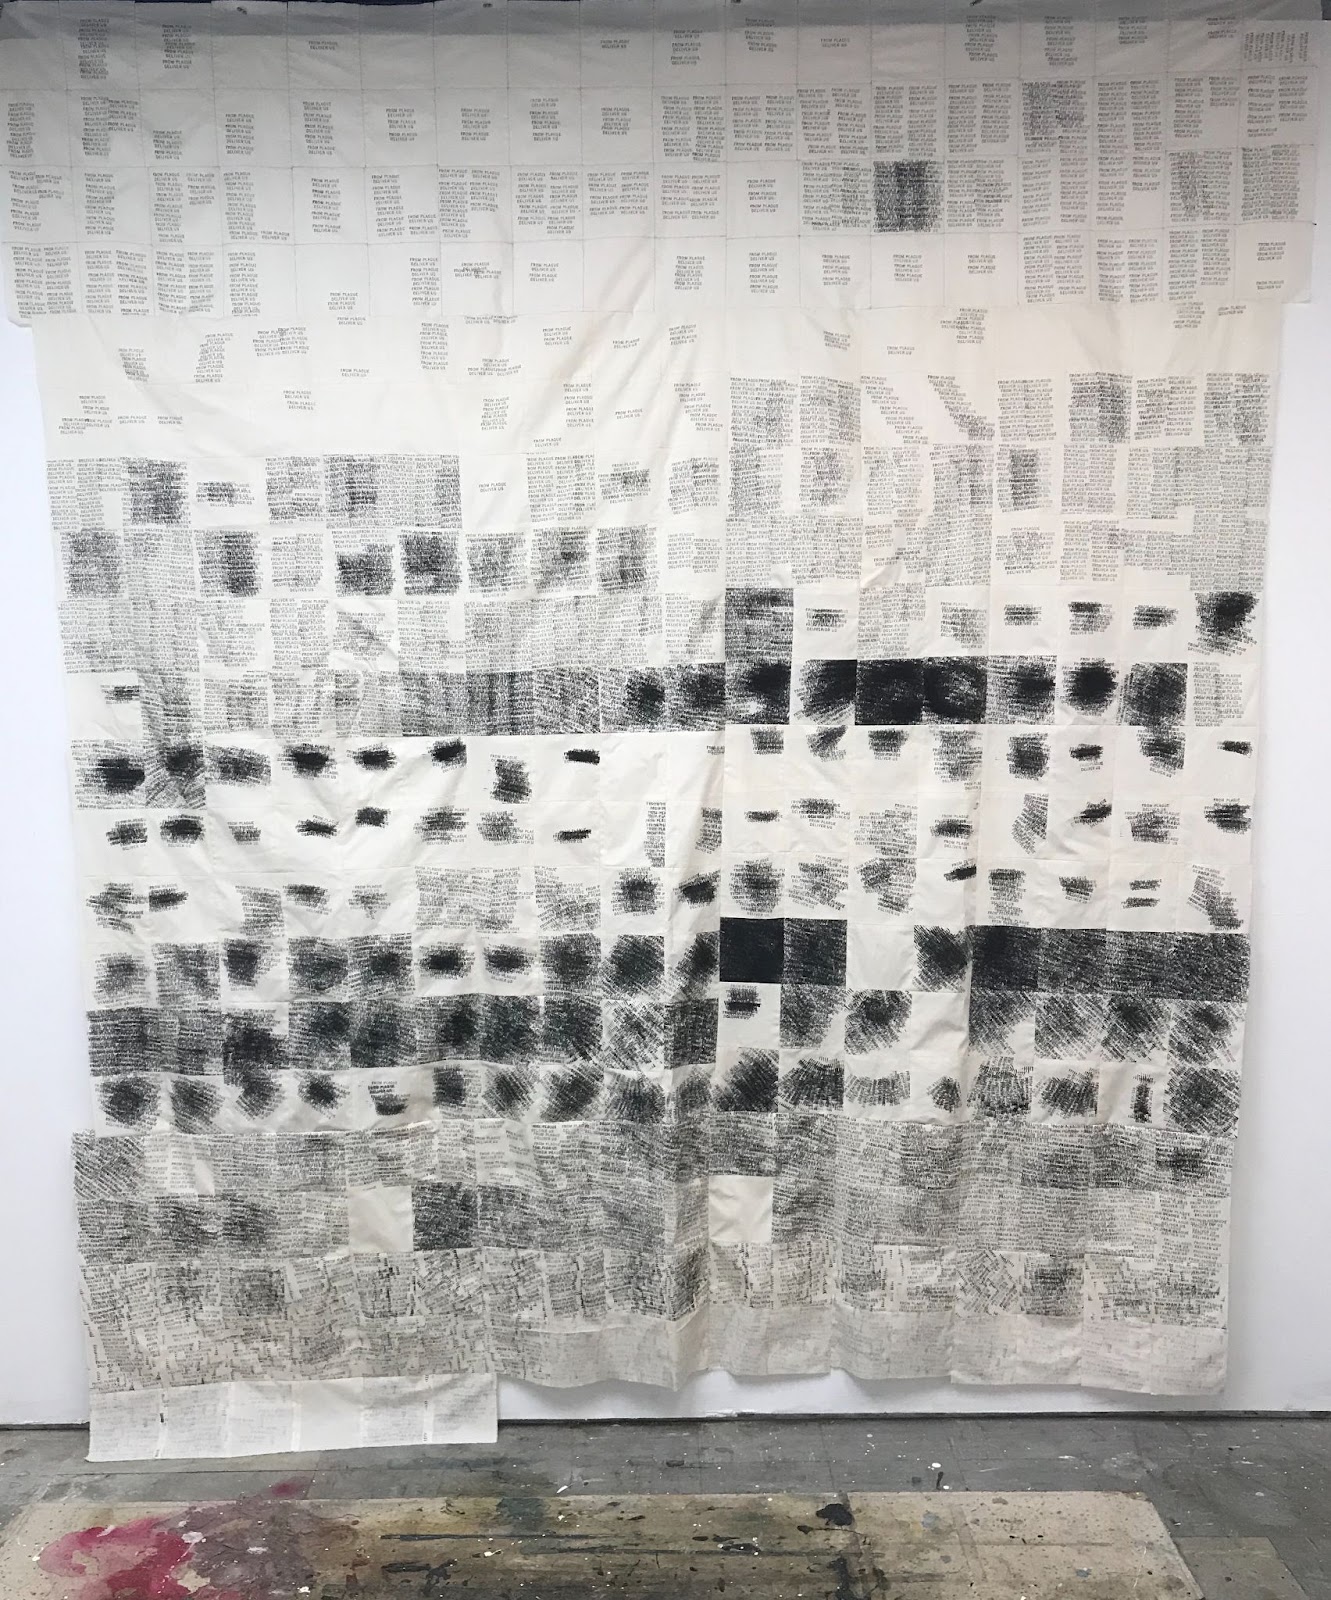 A fifty square foot textile documenting a year of new COVID-19 cases in Johnson county, Iowa. The textile is a cream color and higher case counts are indicated by clusters of overset text in black. It is pieced from 365 squares of 5 by 5 inch fabric.